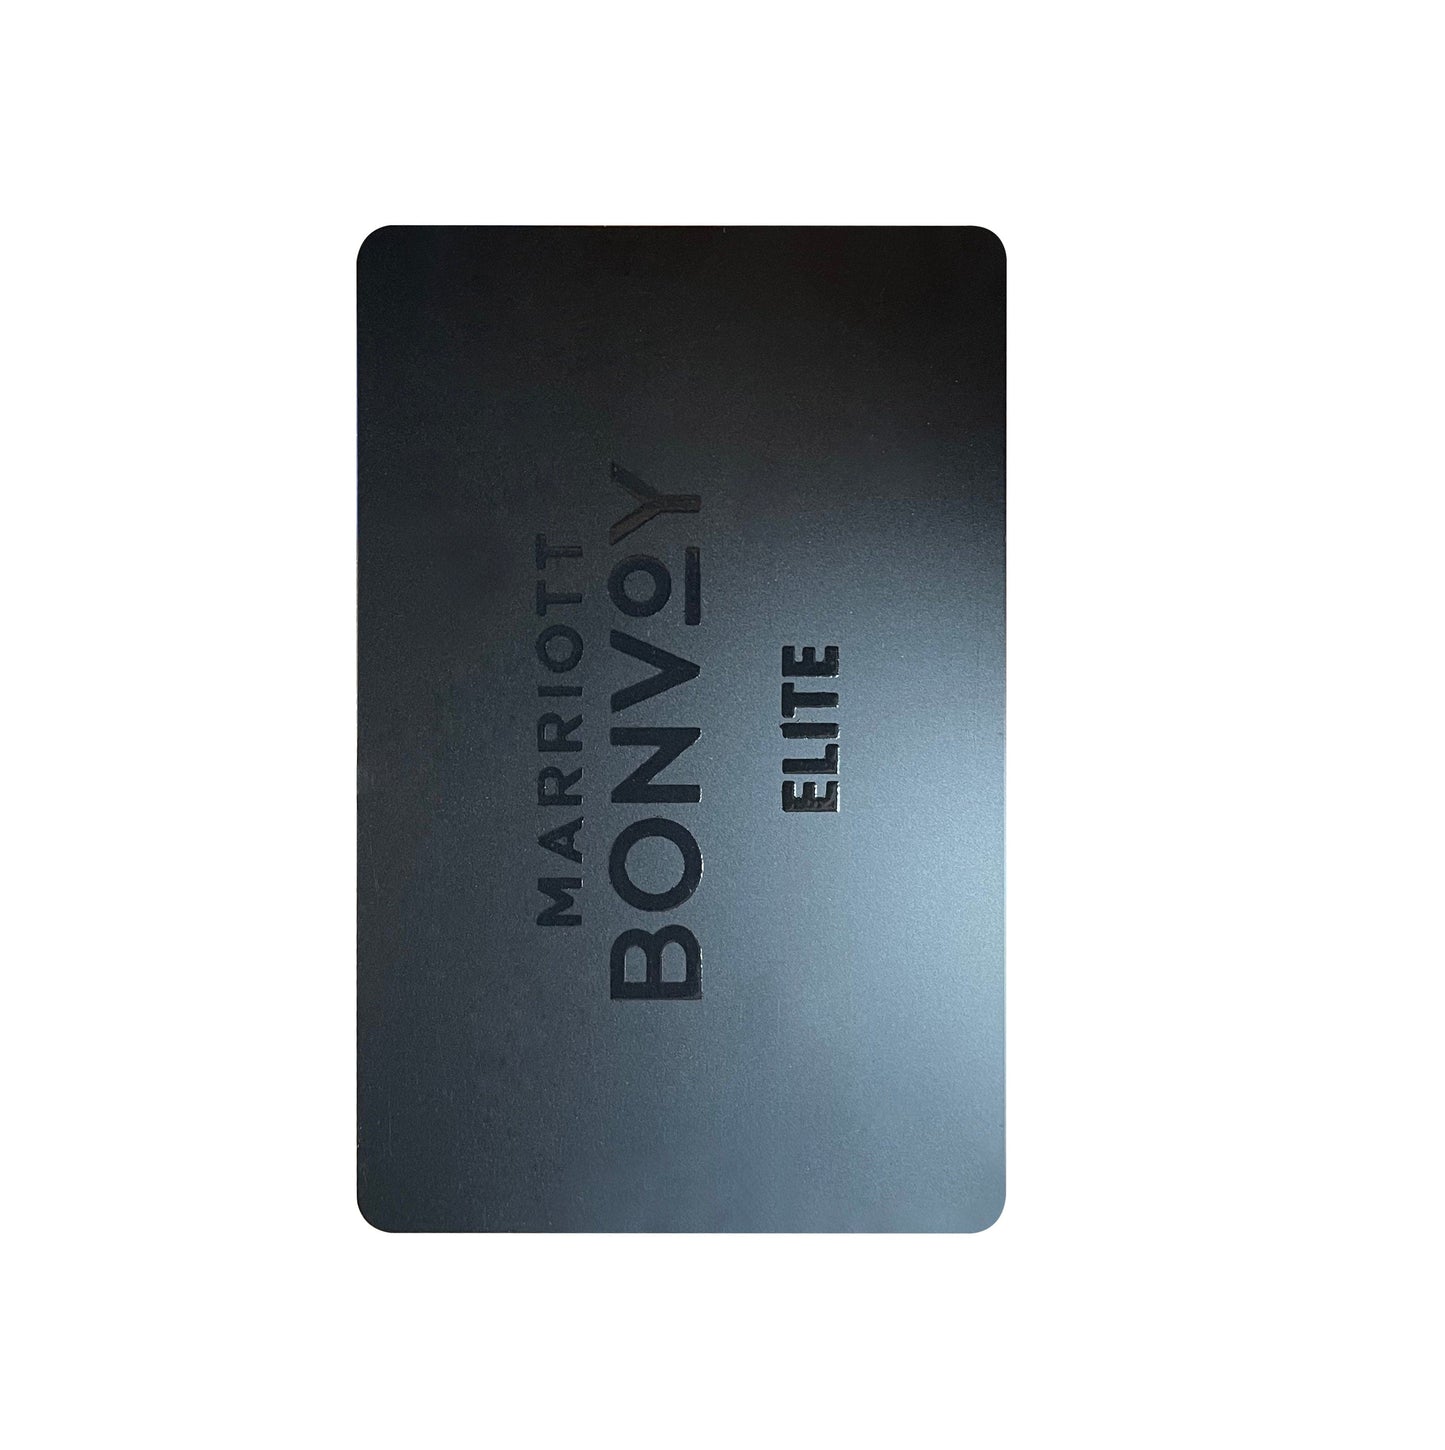 Marriott Bonvoy Member 1K RFID Key Cards Compatible with Assa Abloy* Guest Lock Systems-See Description (Sold in boxes of 200